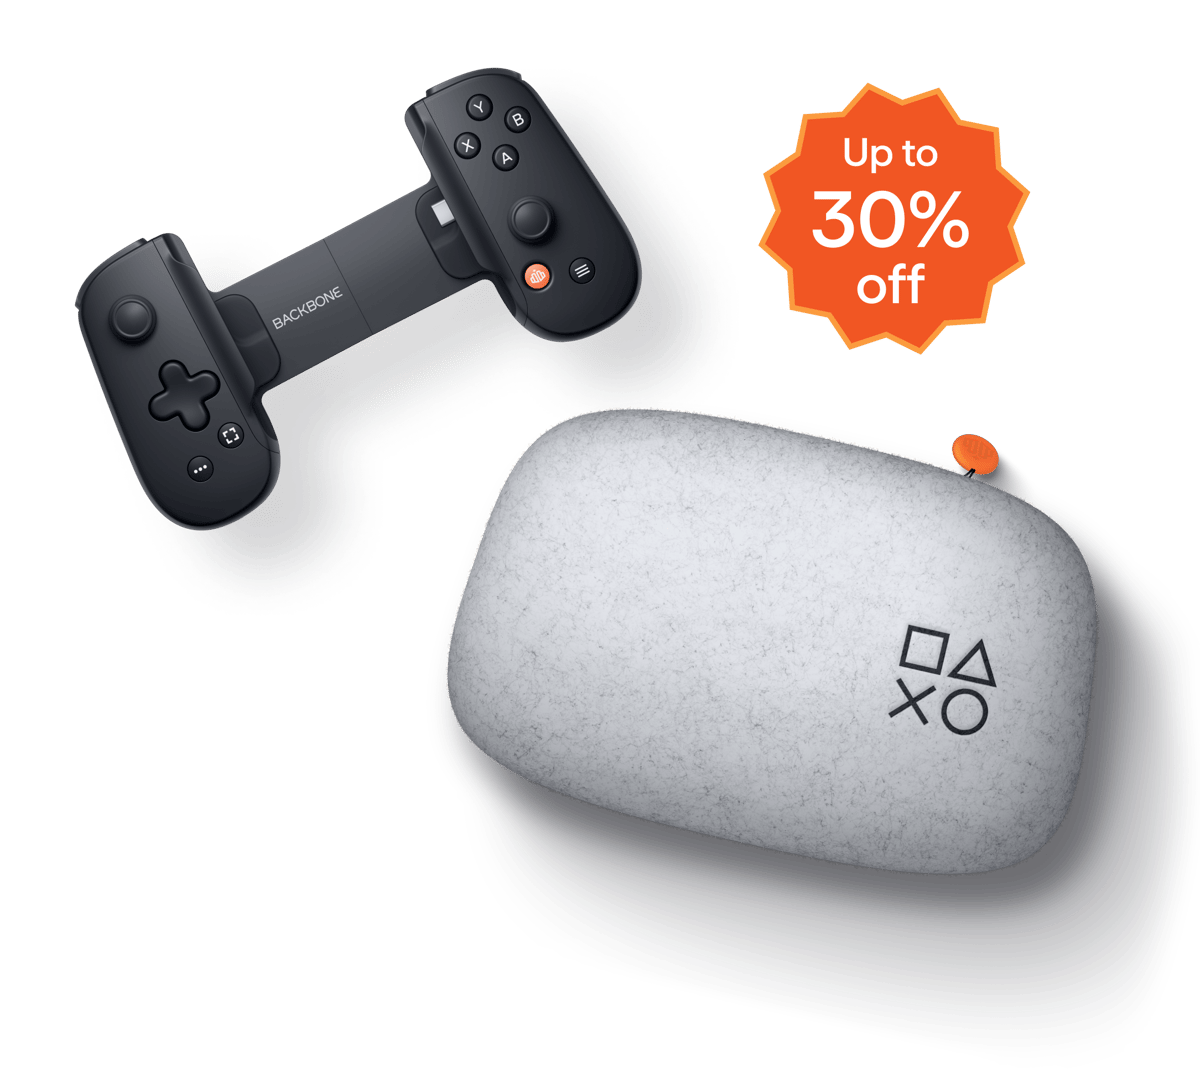 An image of a black Backbone One controller and a white Backbone carrying case, with a banner showing 30% off for Backbone+ Members.